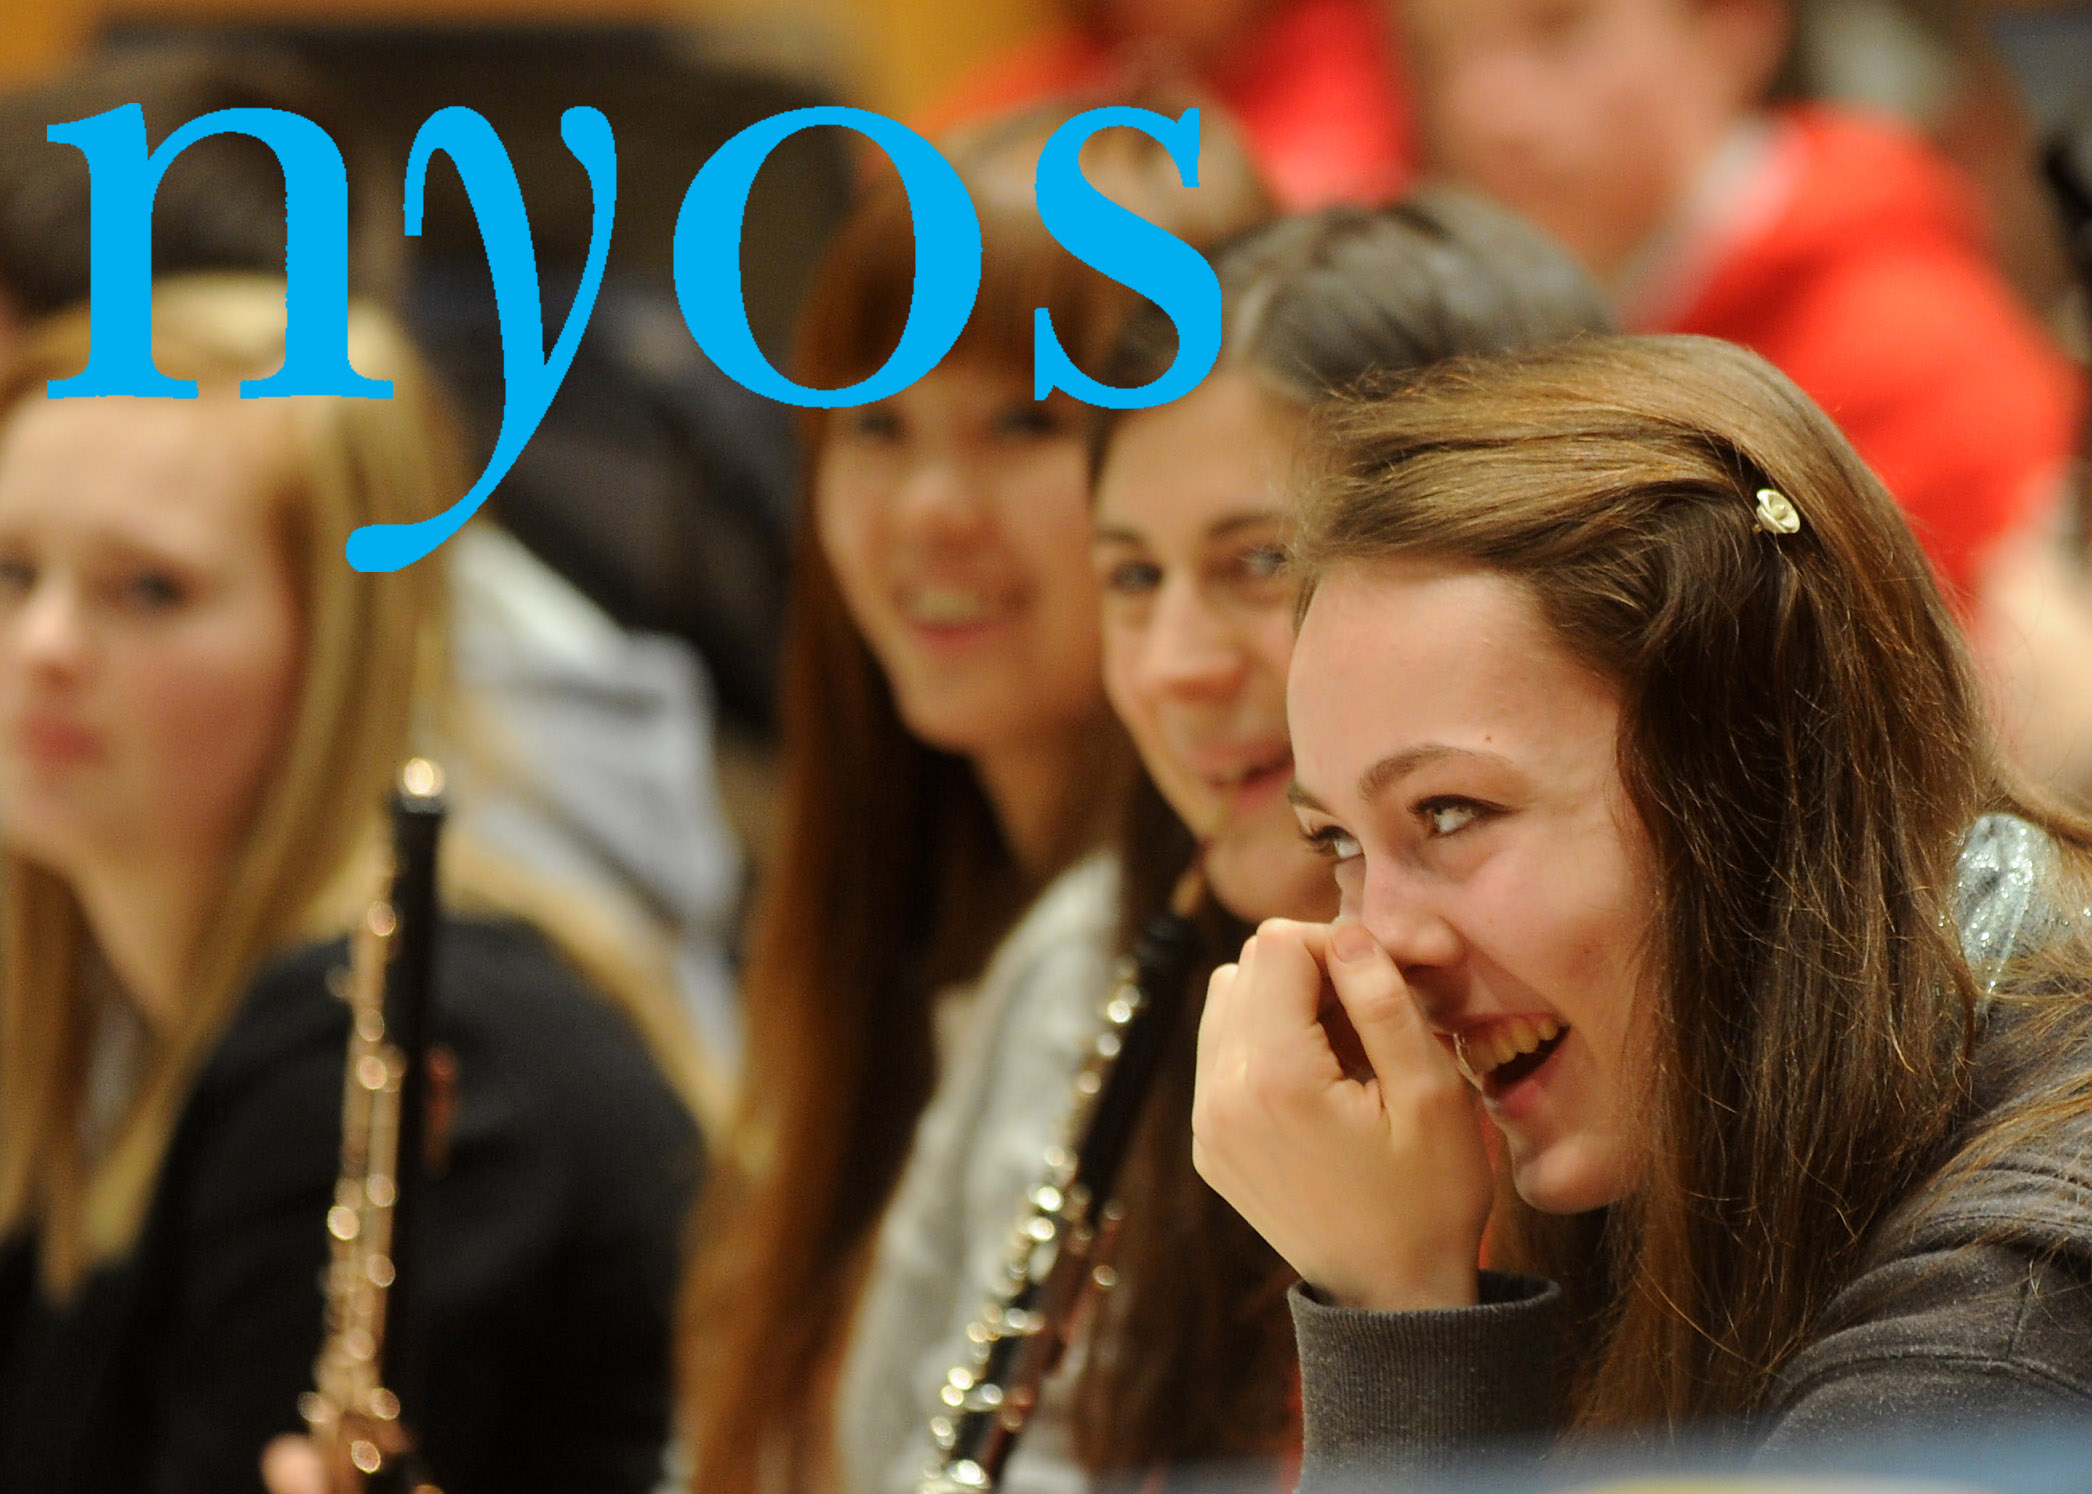 The National Youth Orchestras of Scotland